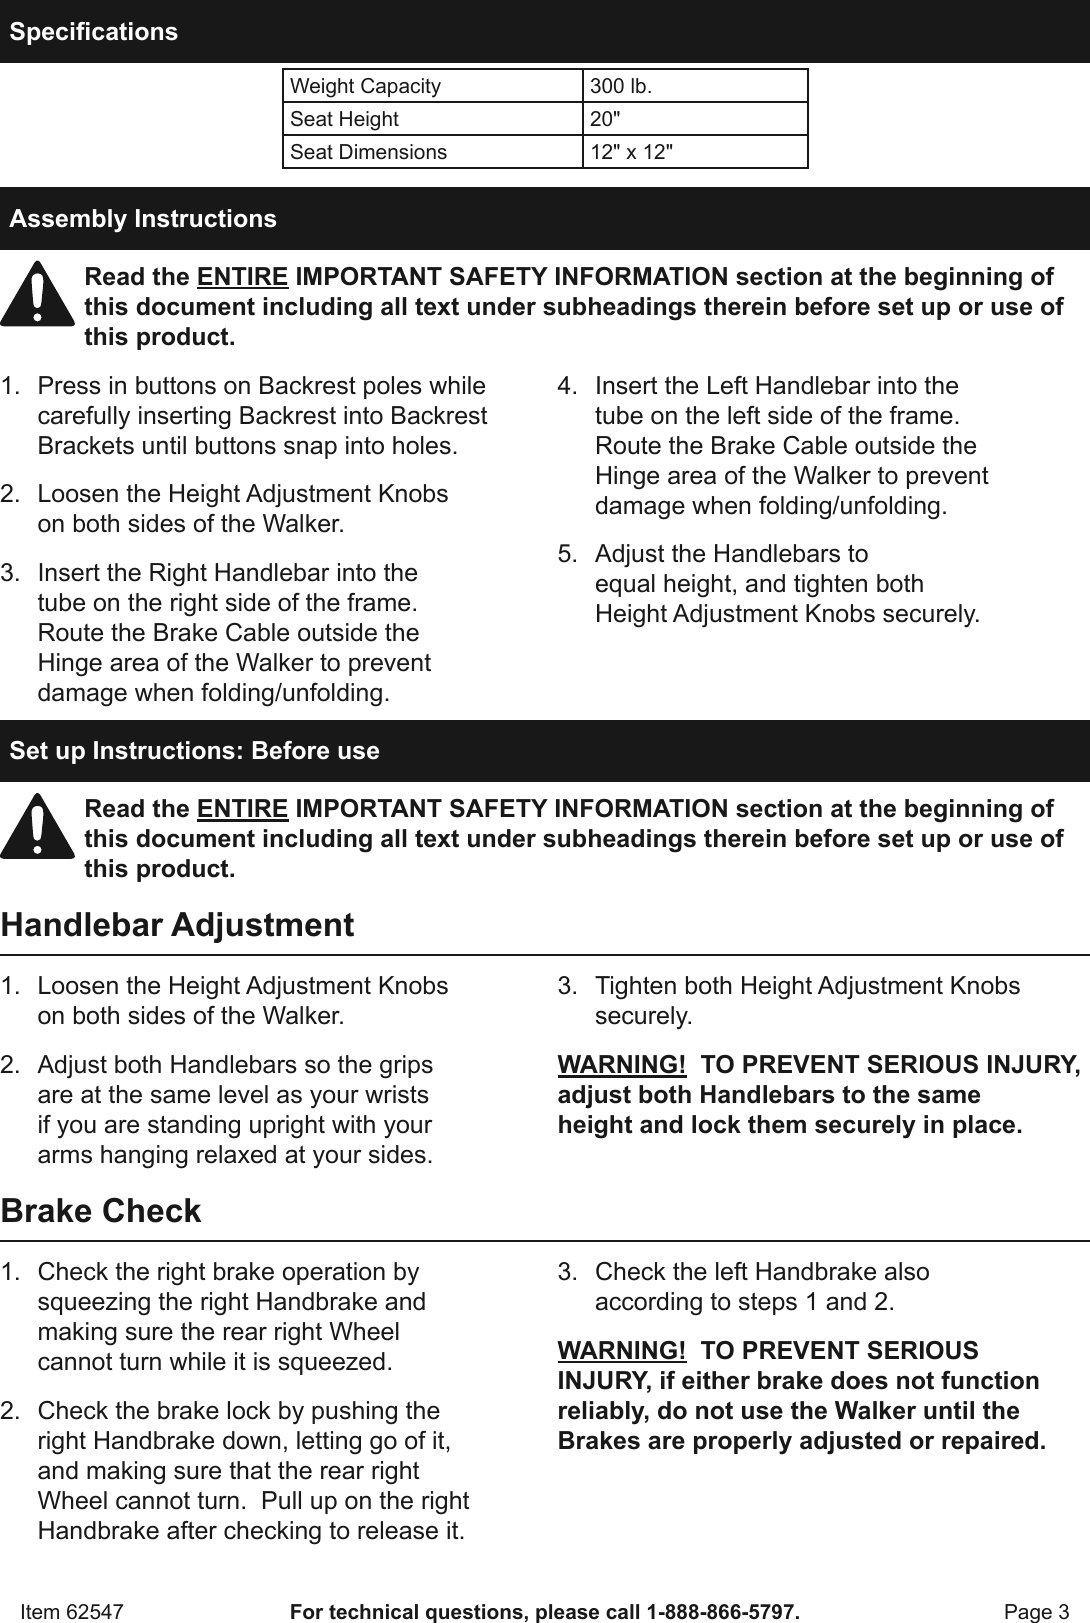 Page 3 of 8 - Manual For The 62547 Sit-or-Stand Behind Rolling Walker